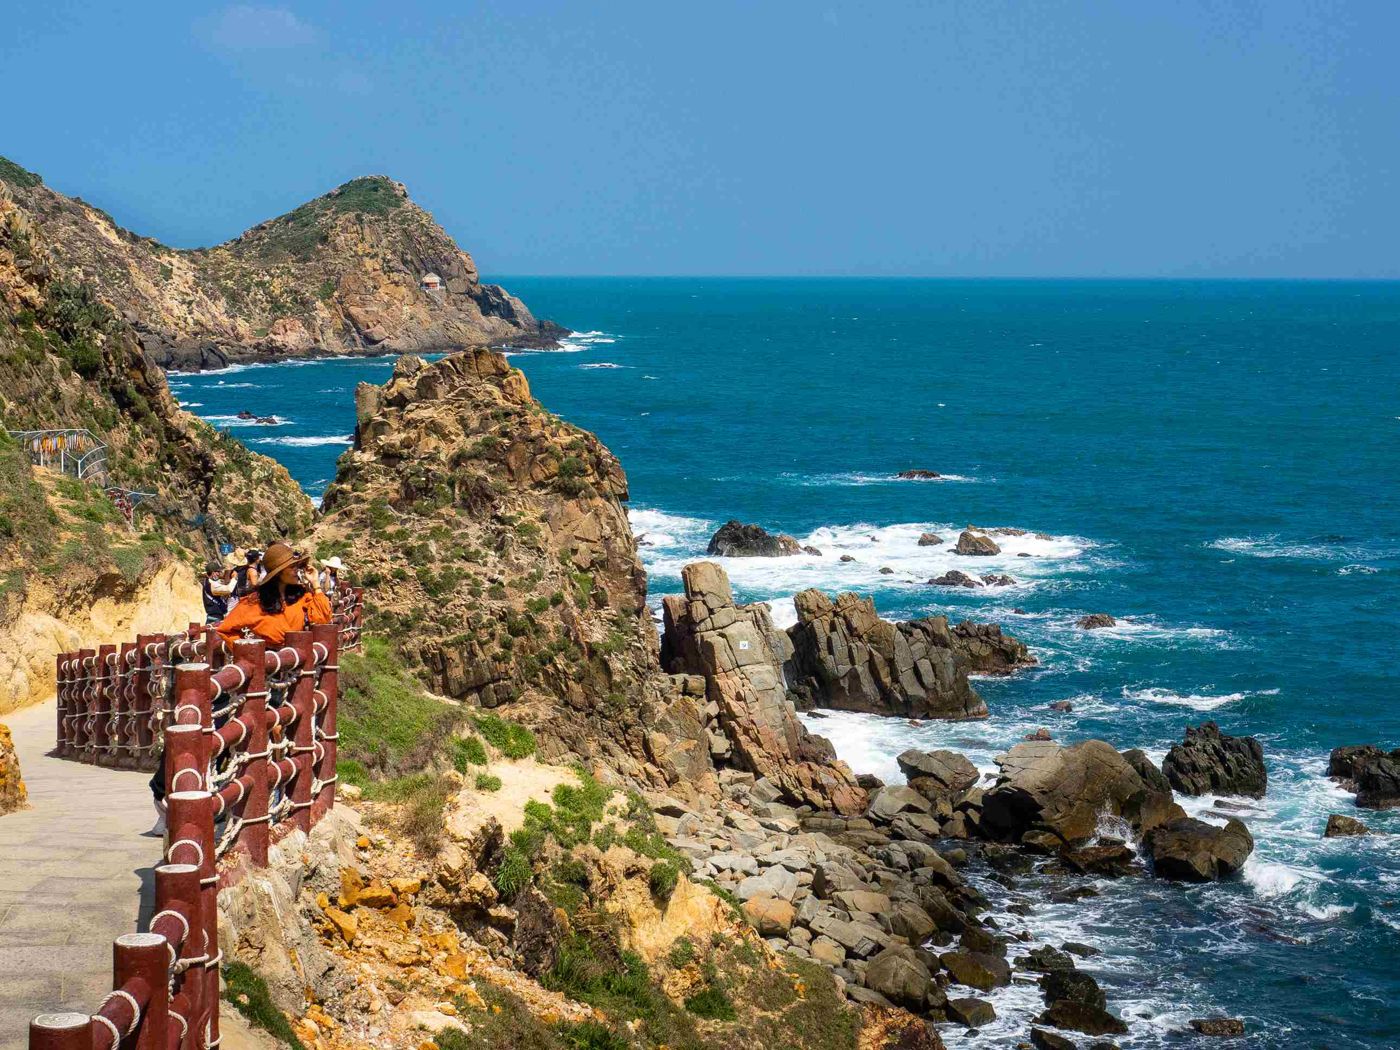 Quy Nhon travel guide - All you need to know